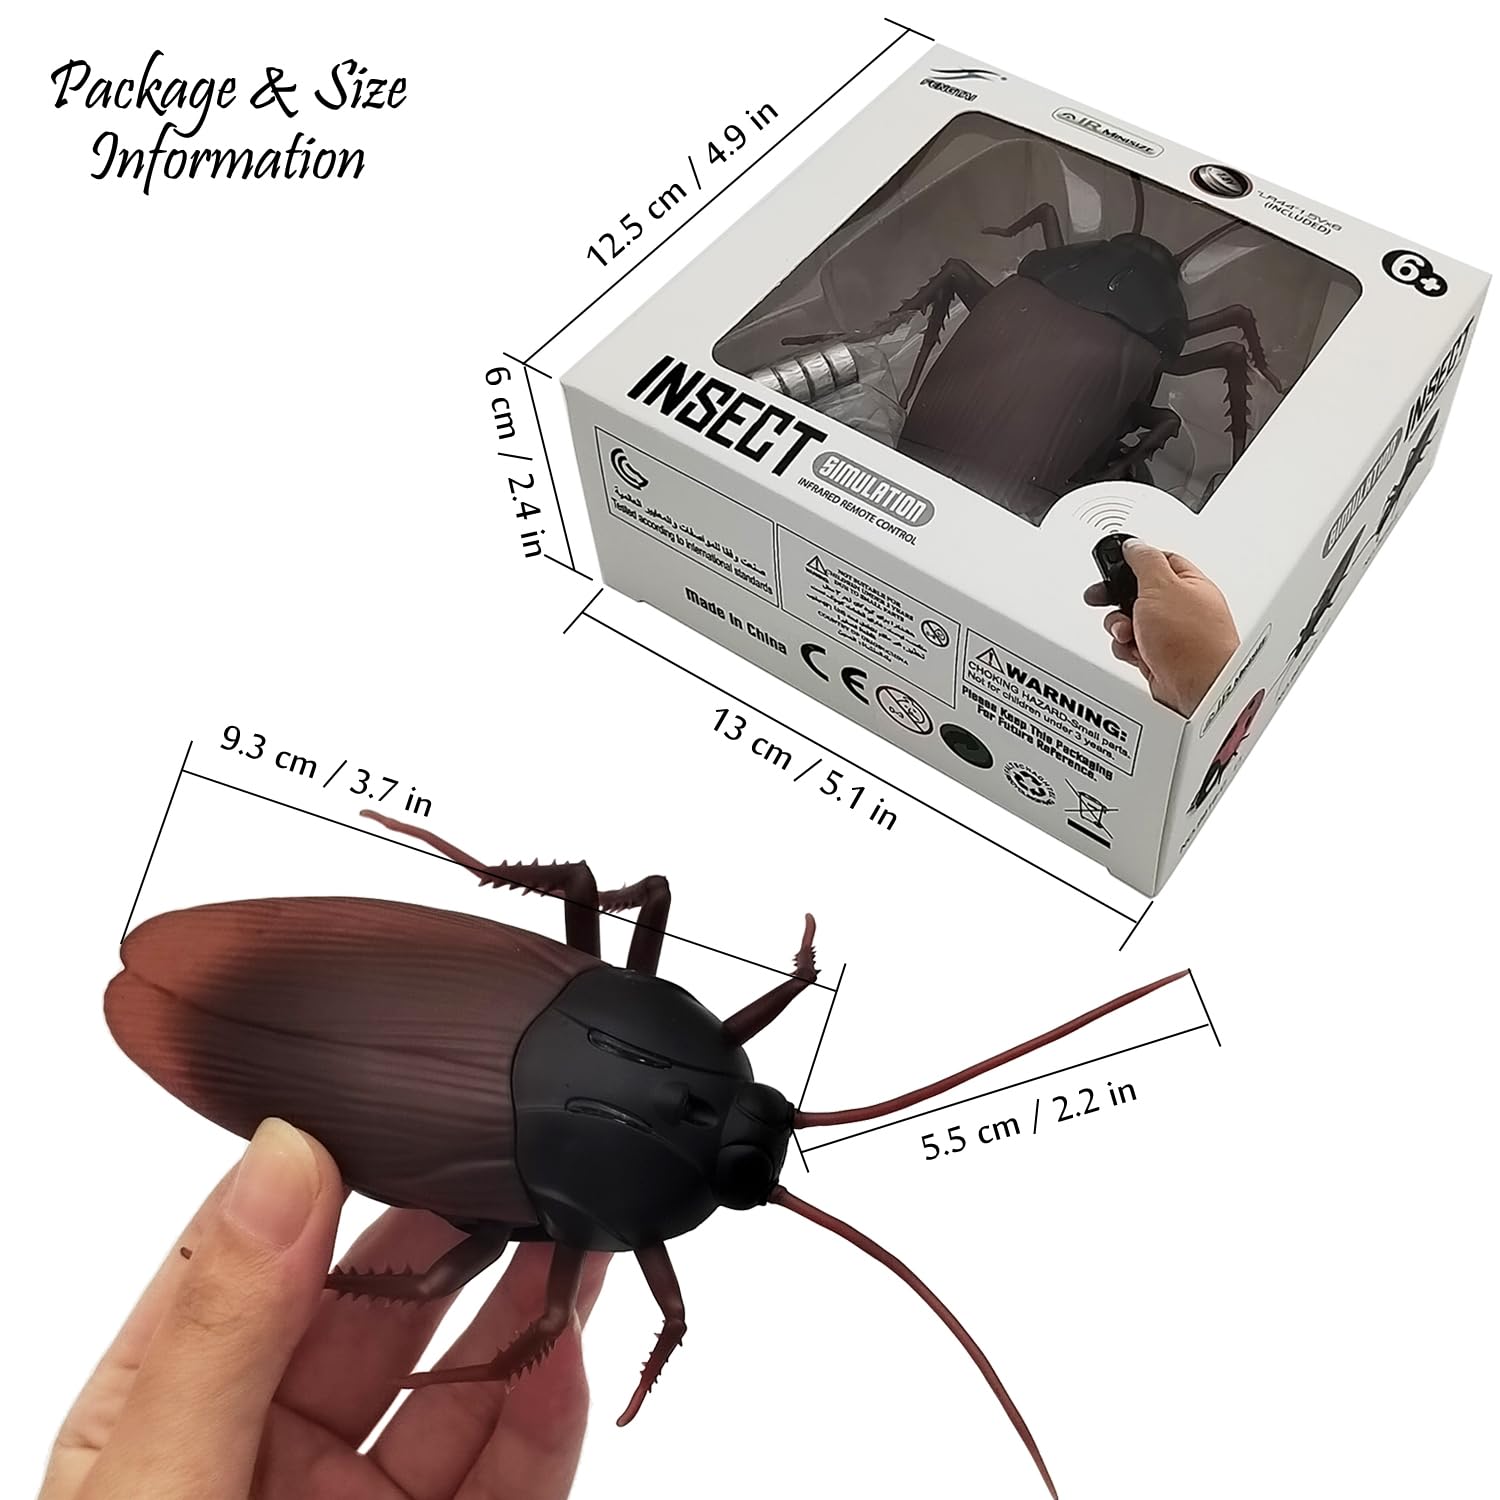 Tipmant RC Cockroach Toy Remote Control Roach Insect Realistic Simulation Electric Electronic Animal for Cat Toddler Kids Birthday Gifts